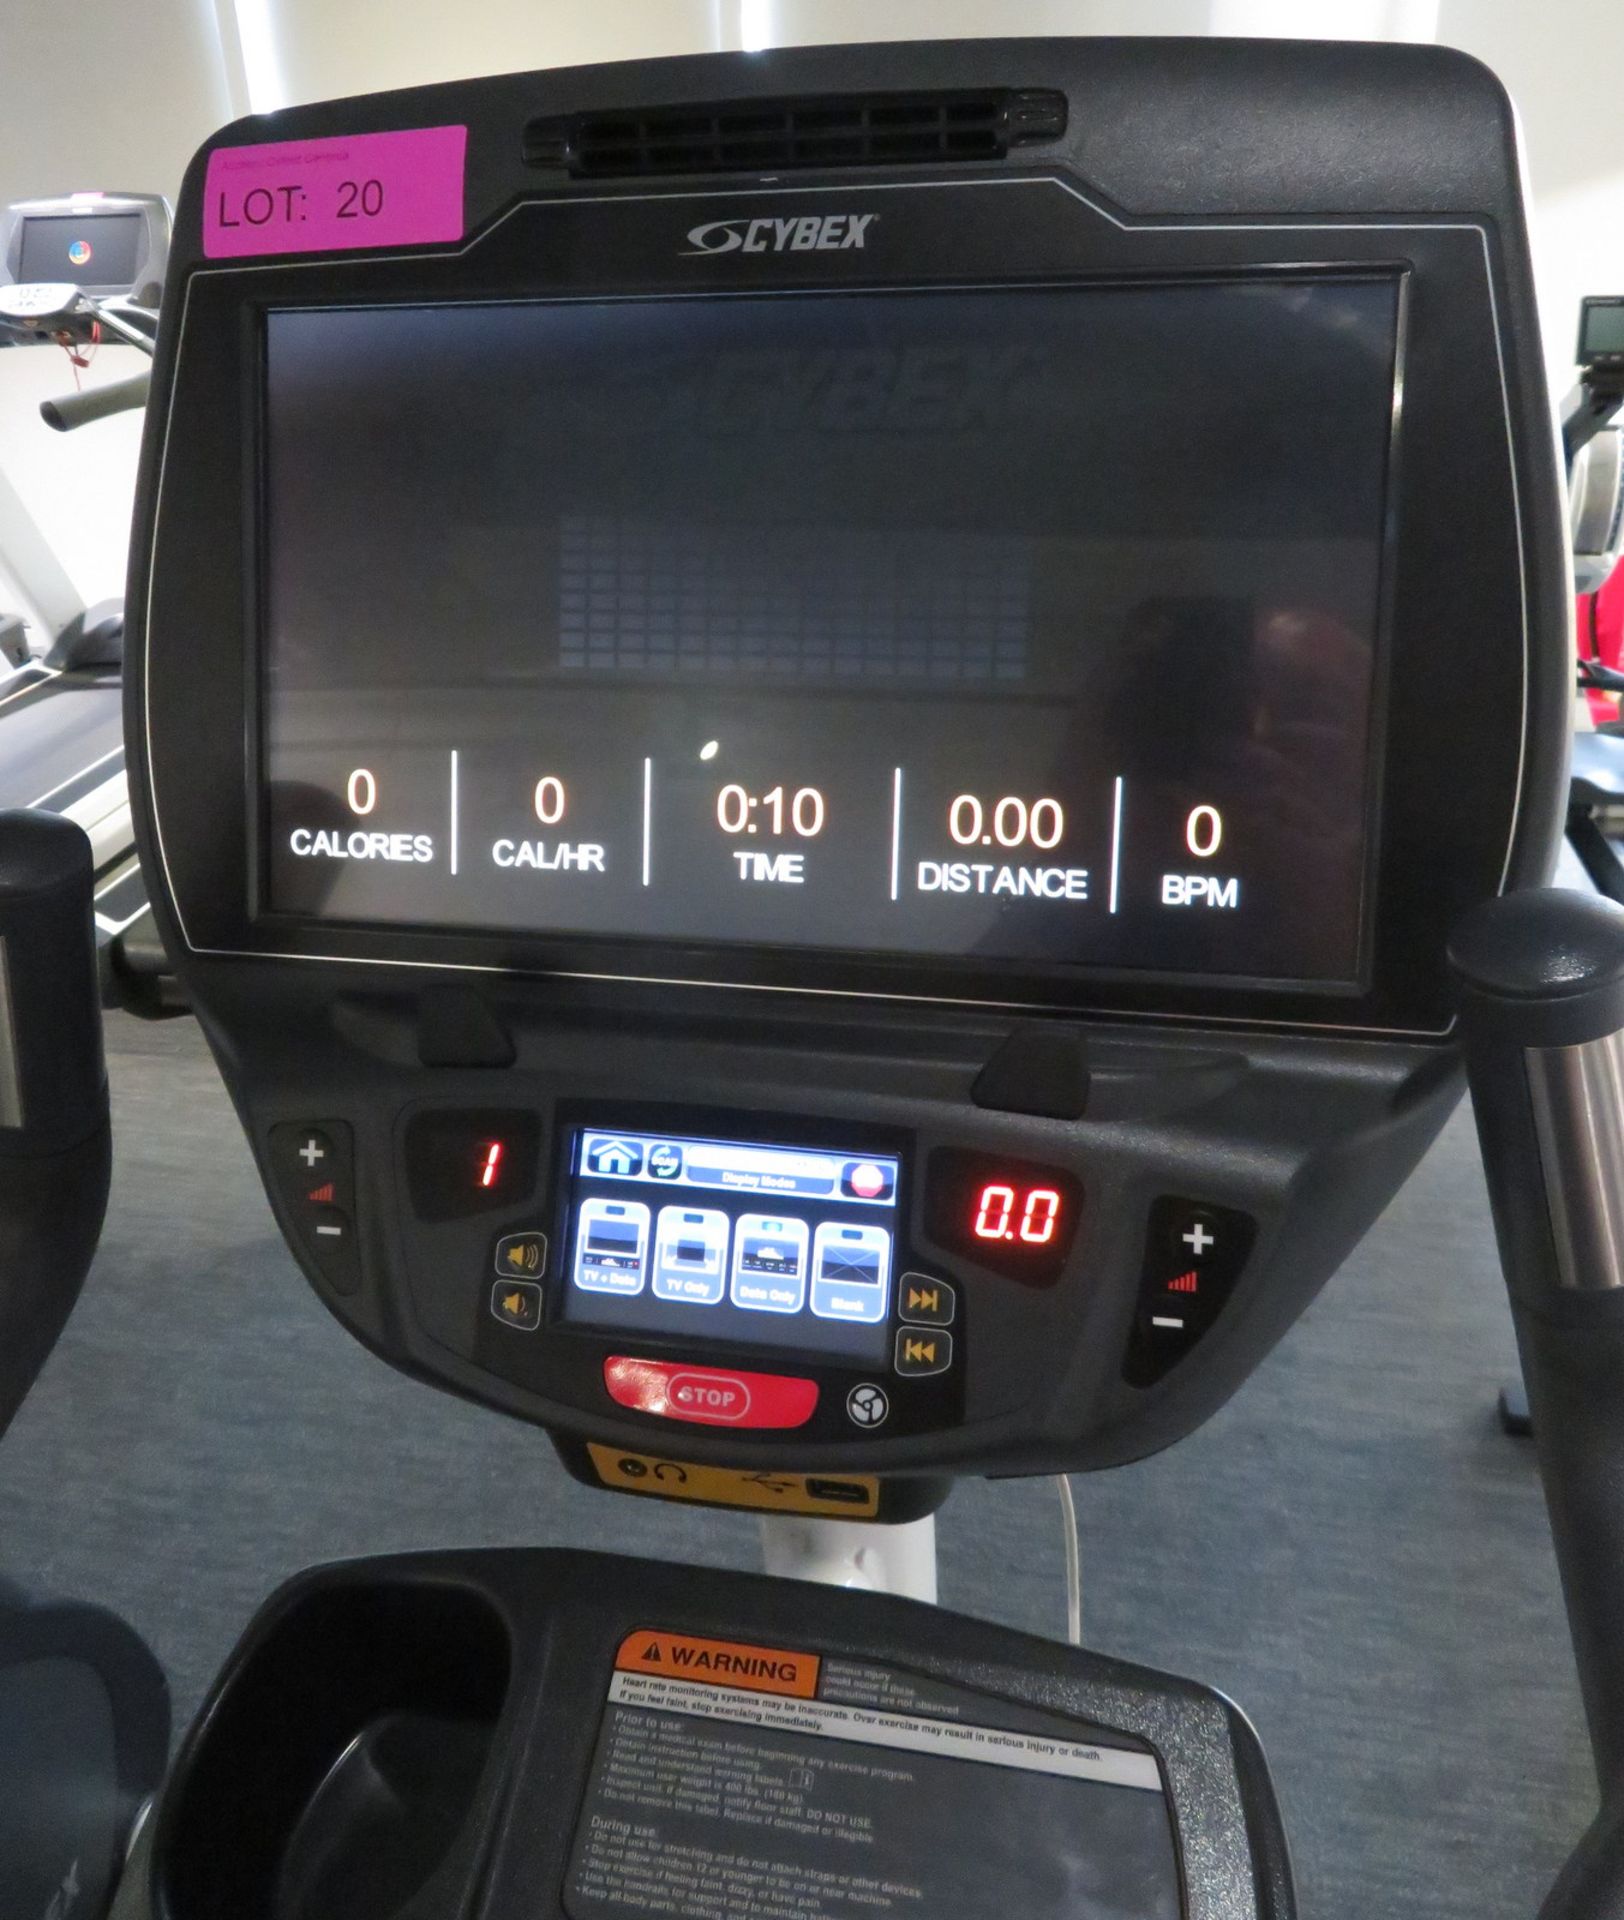 Cybex Upright Bike Model:770C, Working Condition With TV Display Monitor. - Image 6 of 6